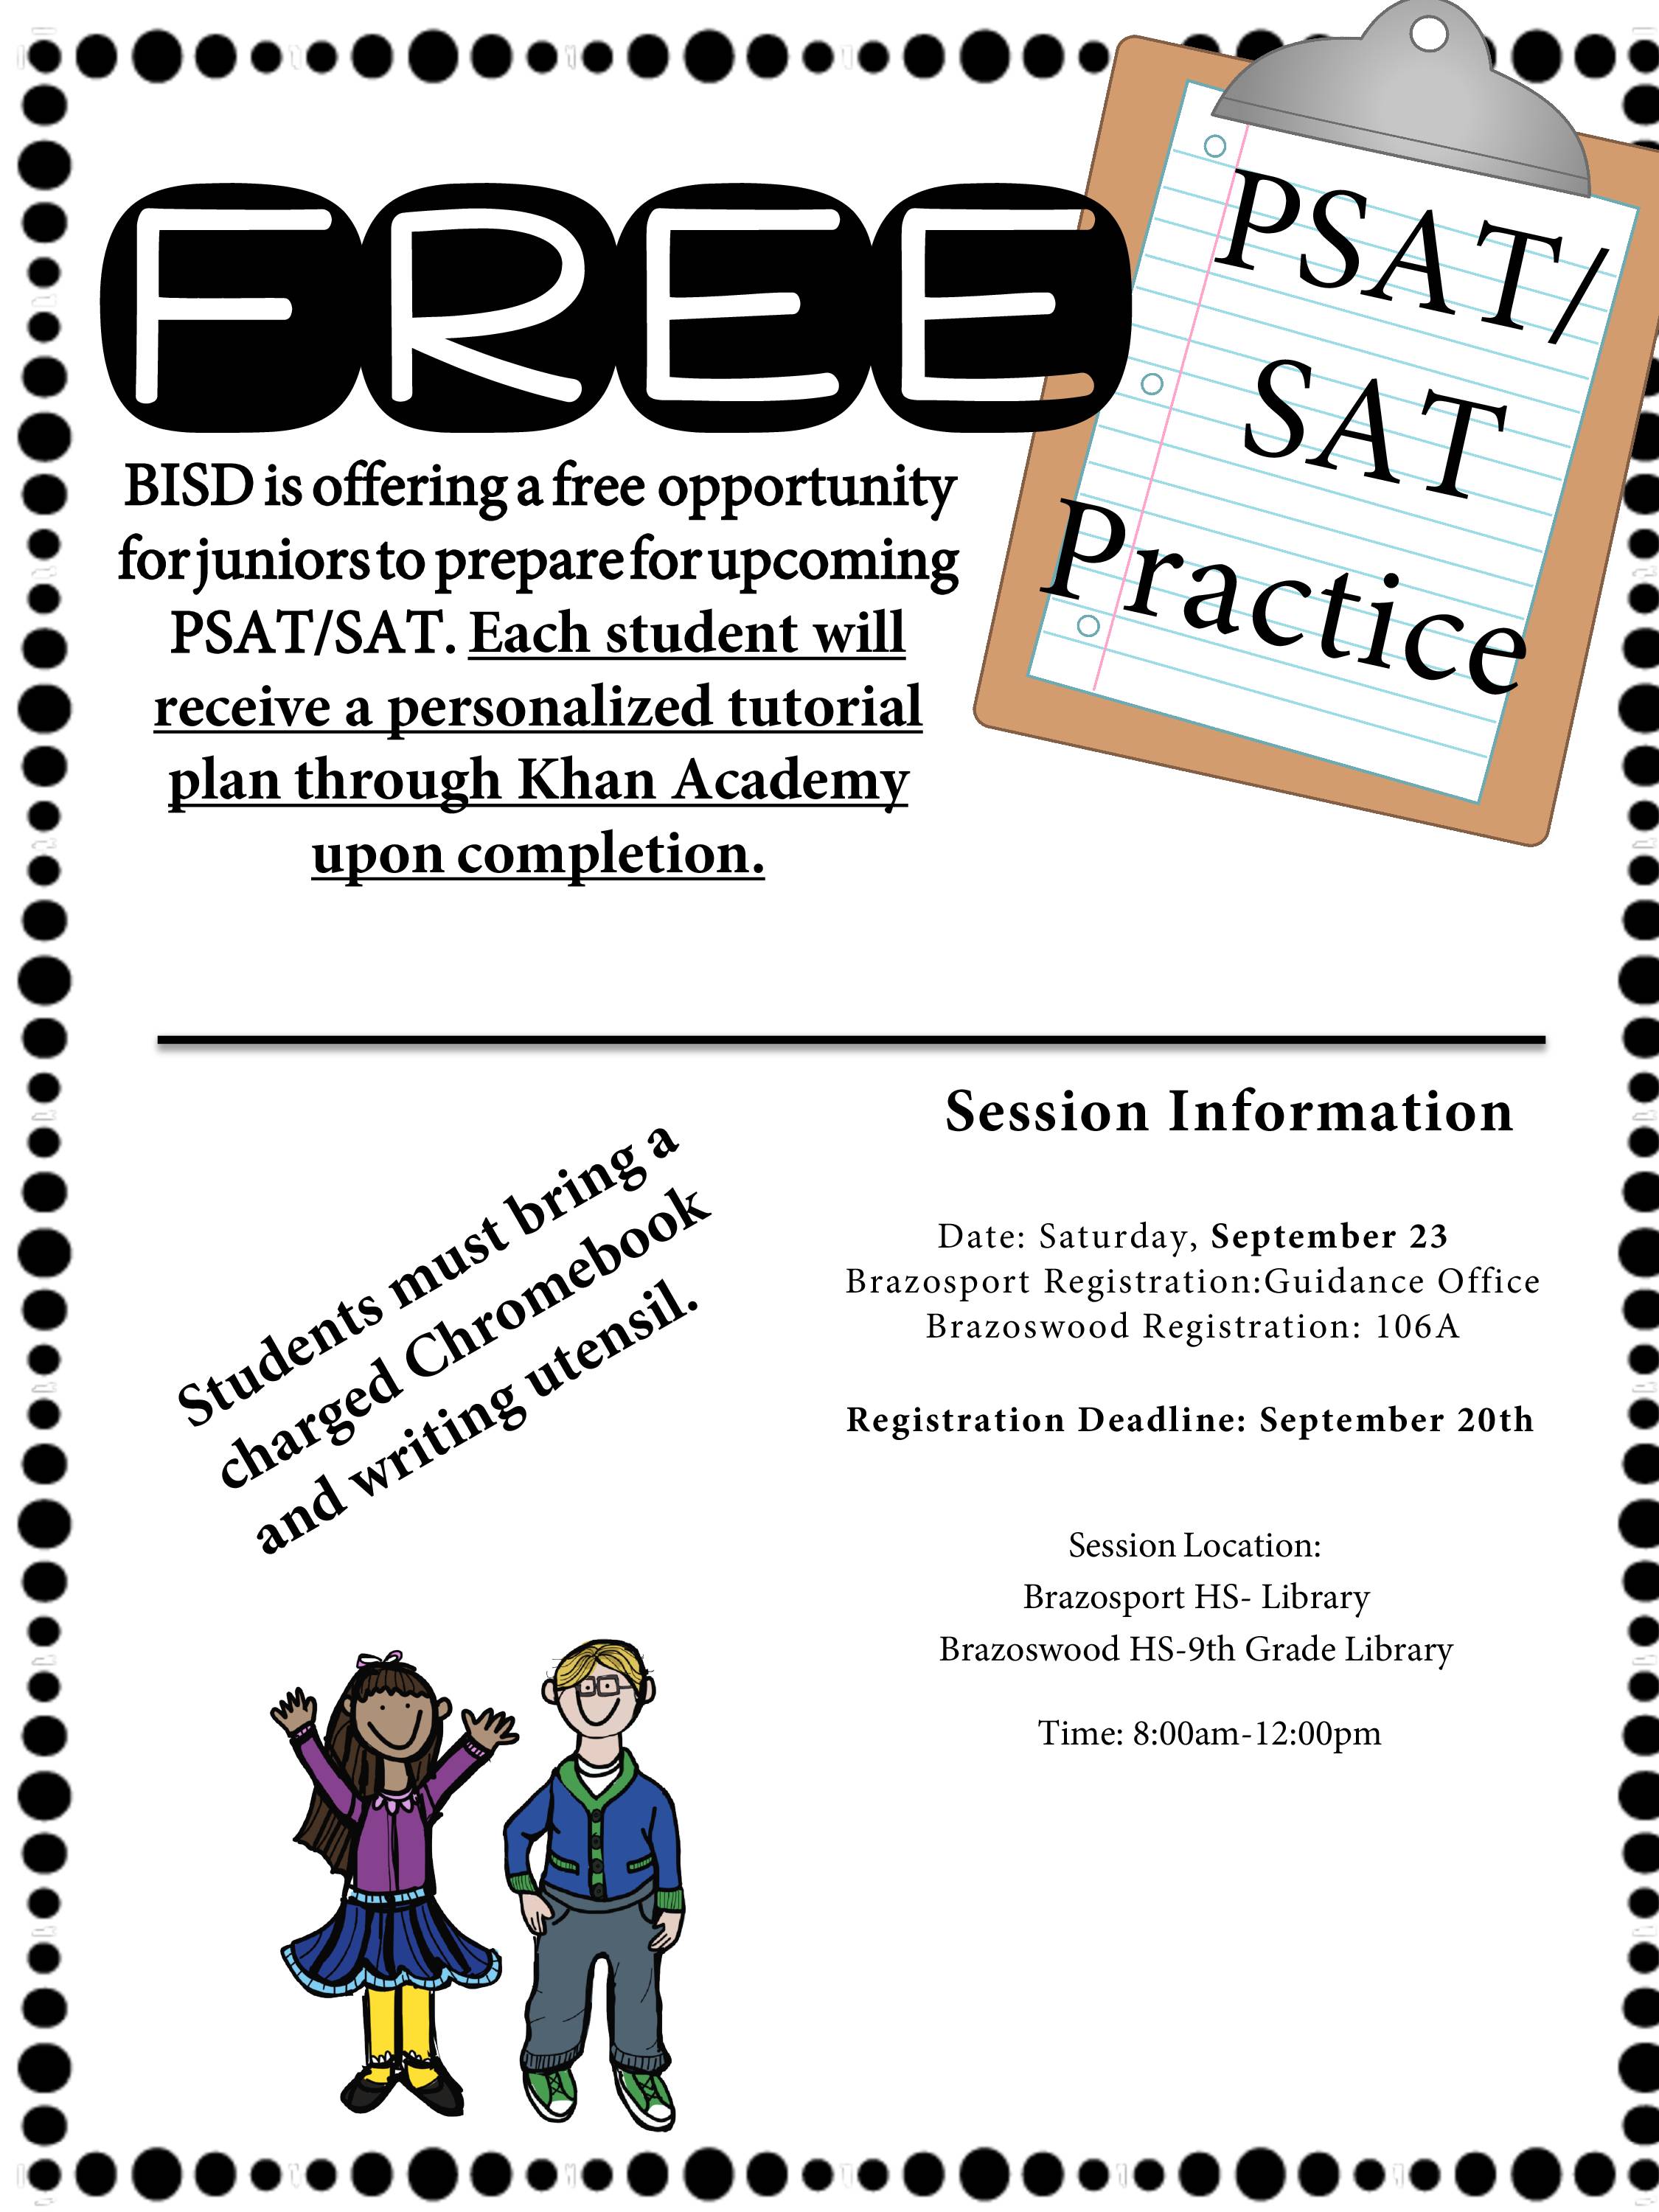 Information Flyer for Practice Sessions